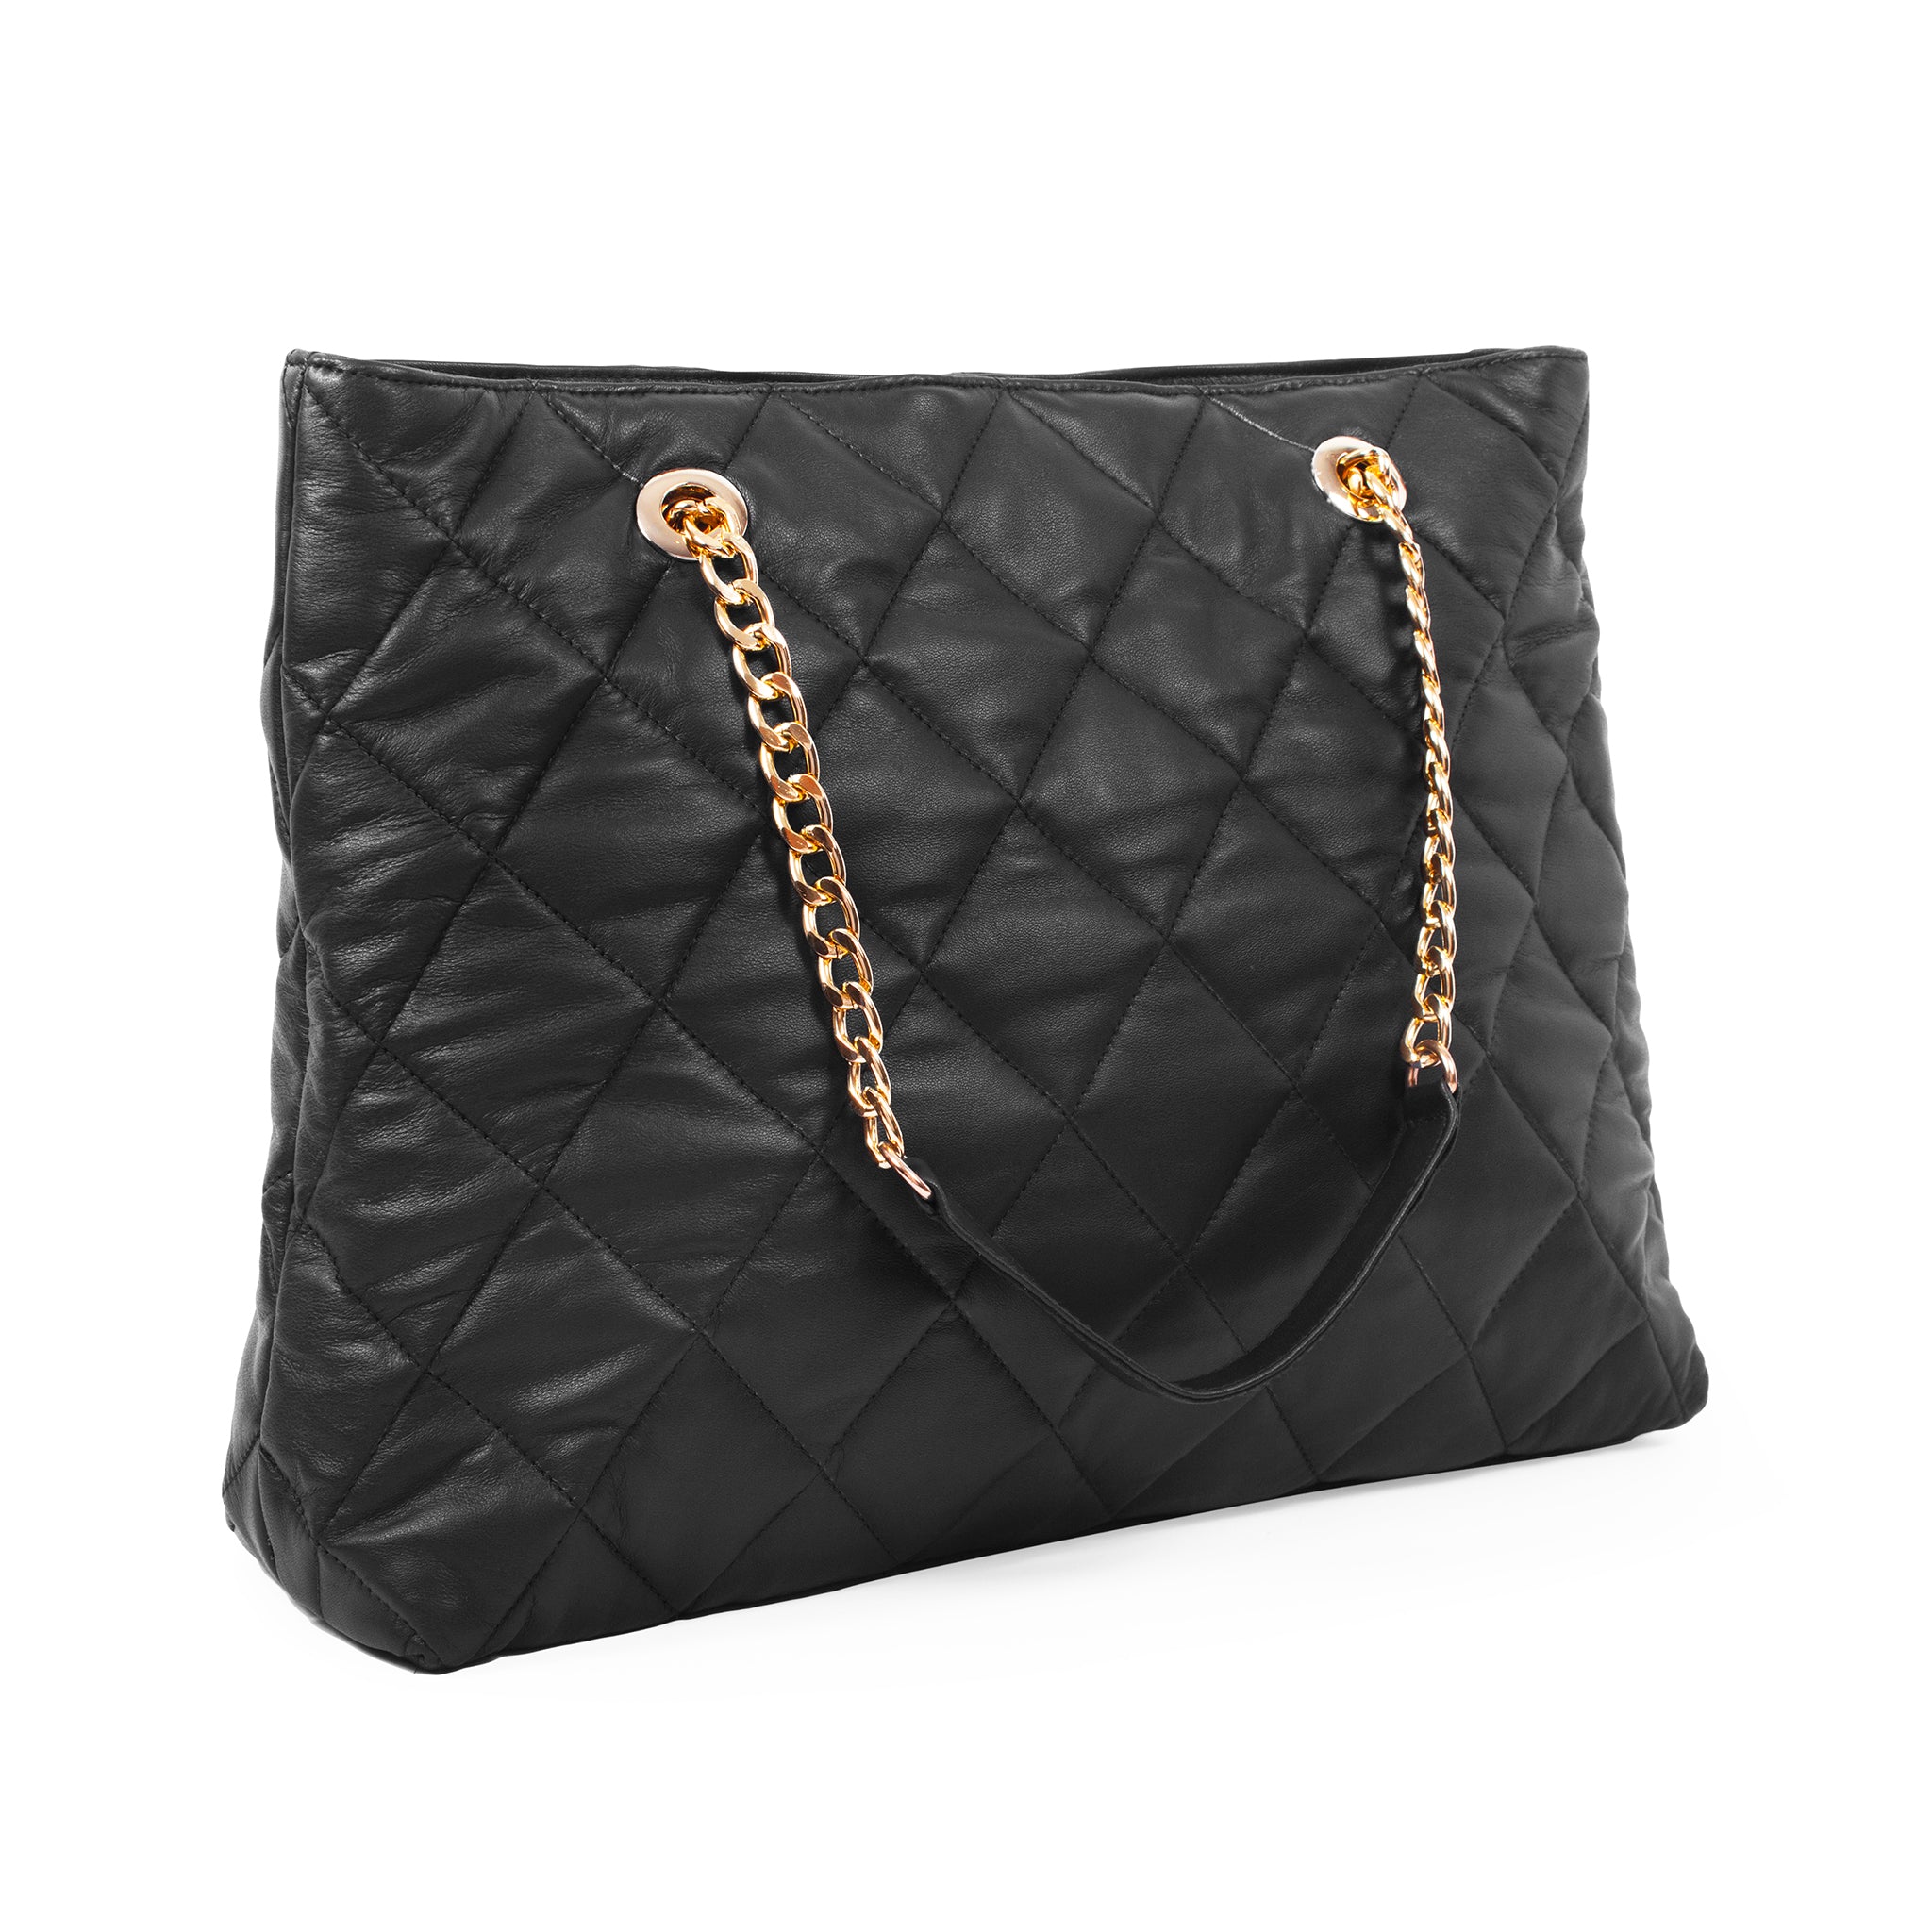 Quilted lambskin leather tote shoulder bag